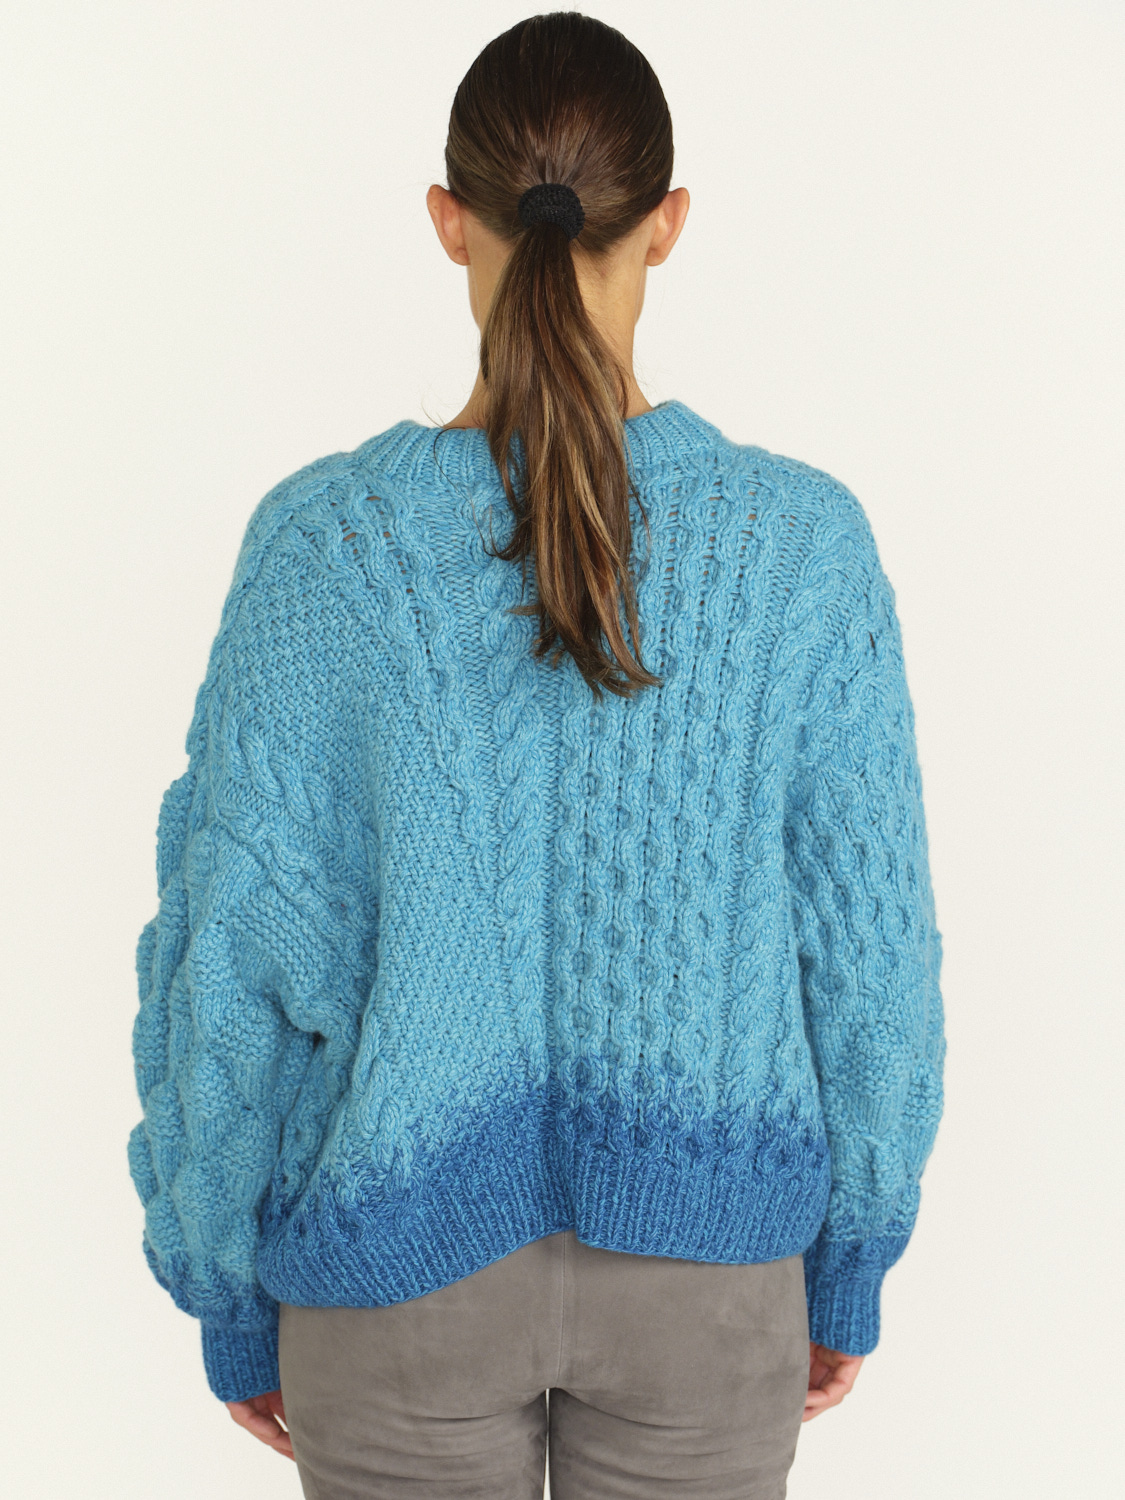 Letanne Marnie - Oversized Cashmere Sweater  blue One Size